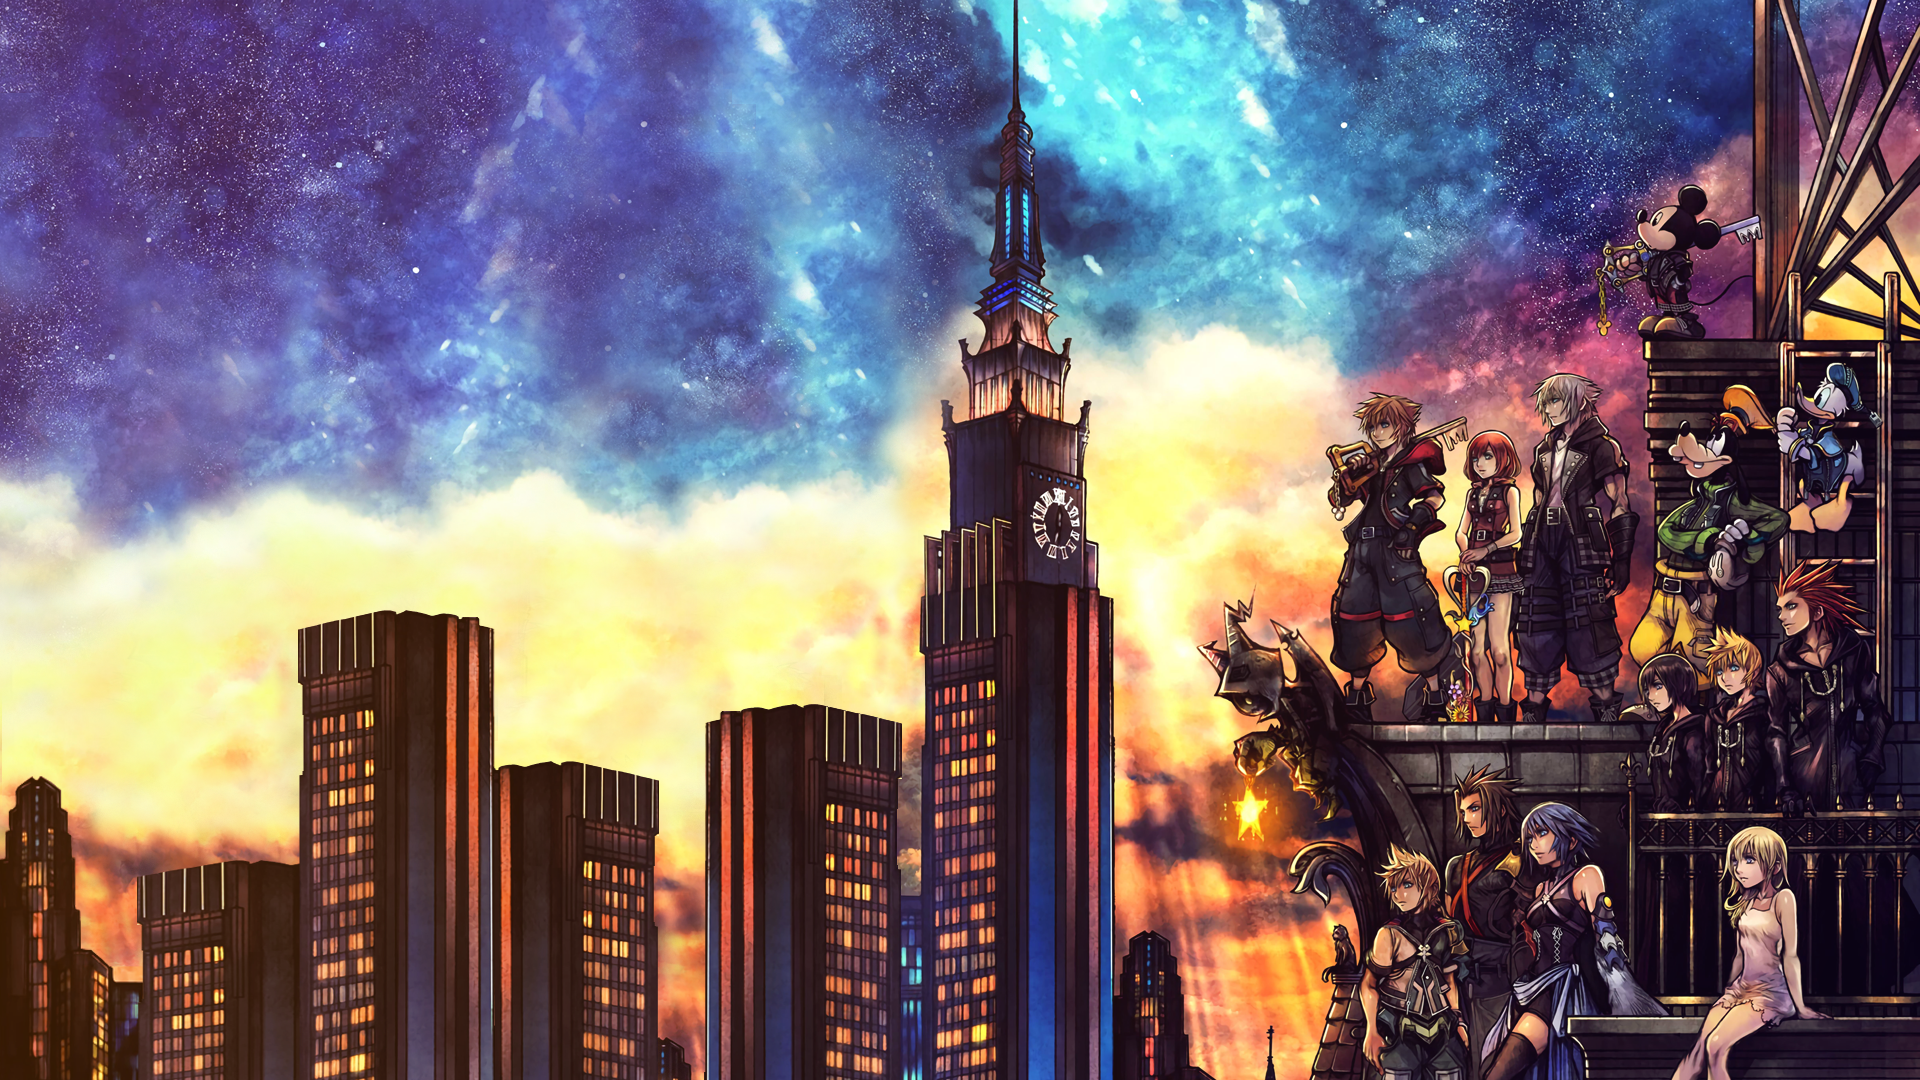 Free download Kingdom Hearts Wallpaper HD 68 images [1920x1080] for